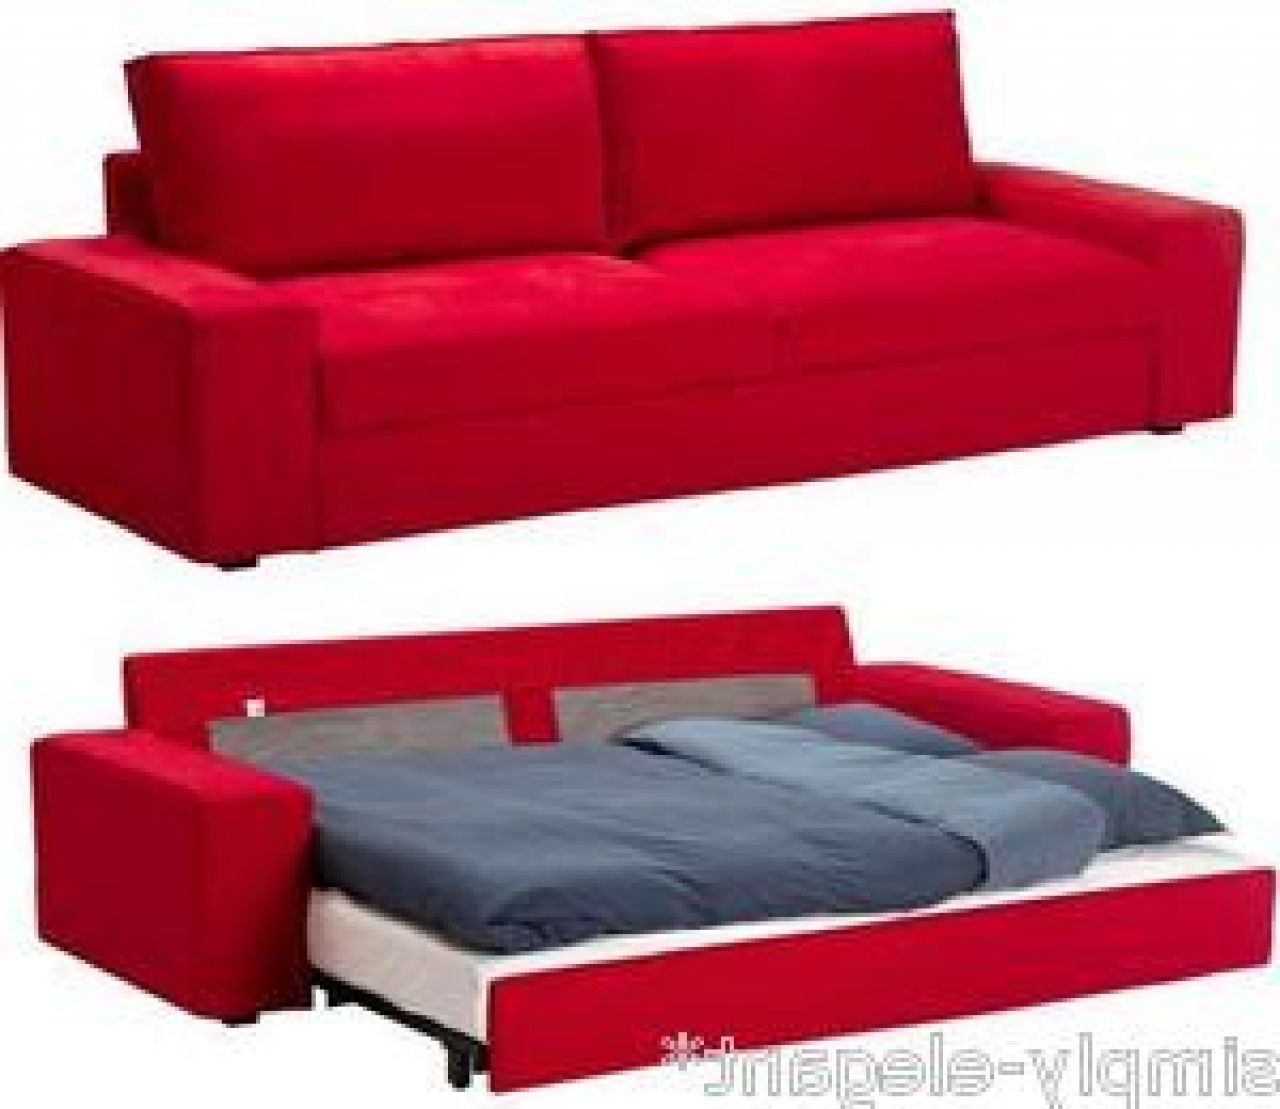 2018 Red Sleeper Sofa Expansive Table Chair Sets Beds, Frames Bases With Red Sleeper Sofas (View 3 of 15)